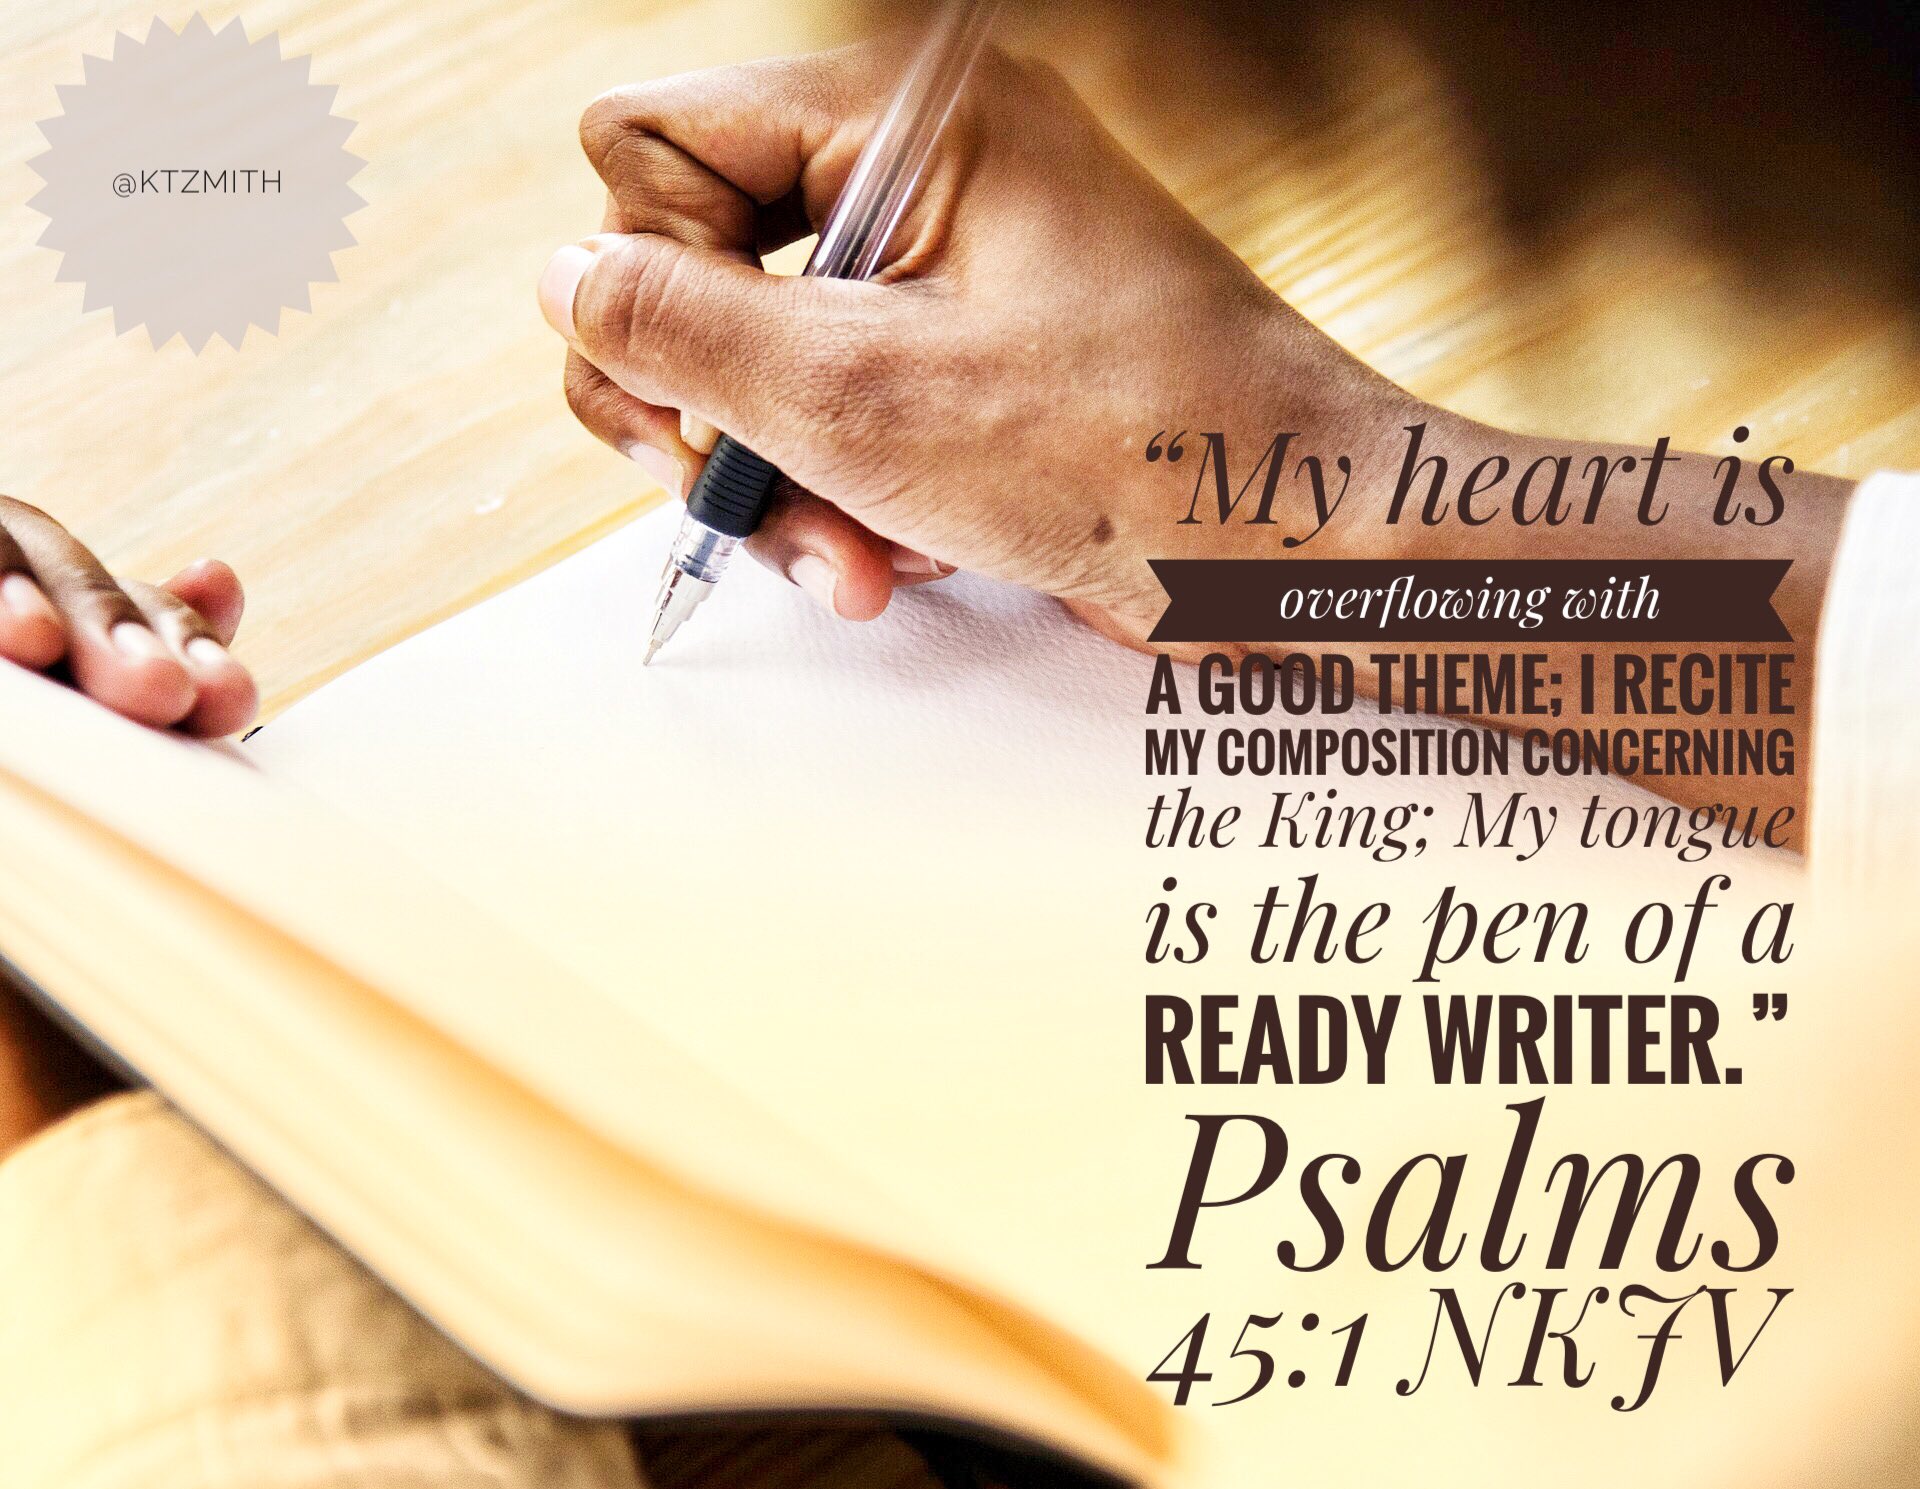 Scripture Writing Supplies - Write Them On My Heart